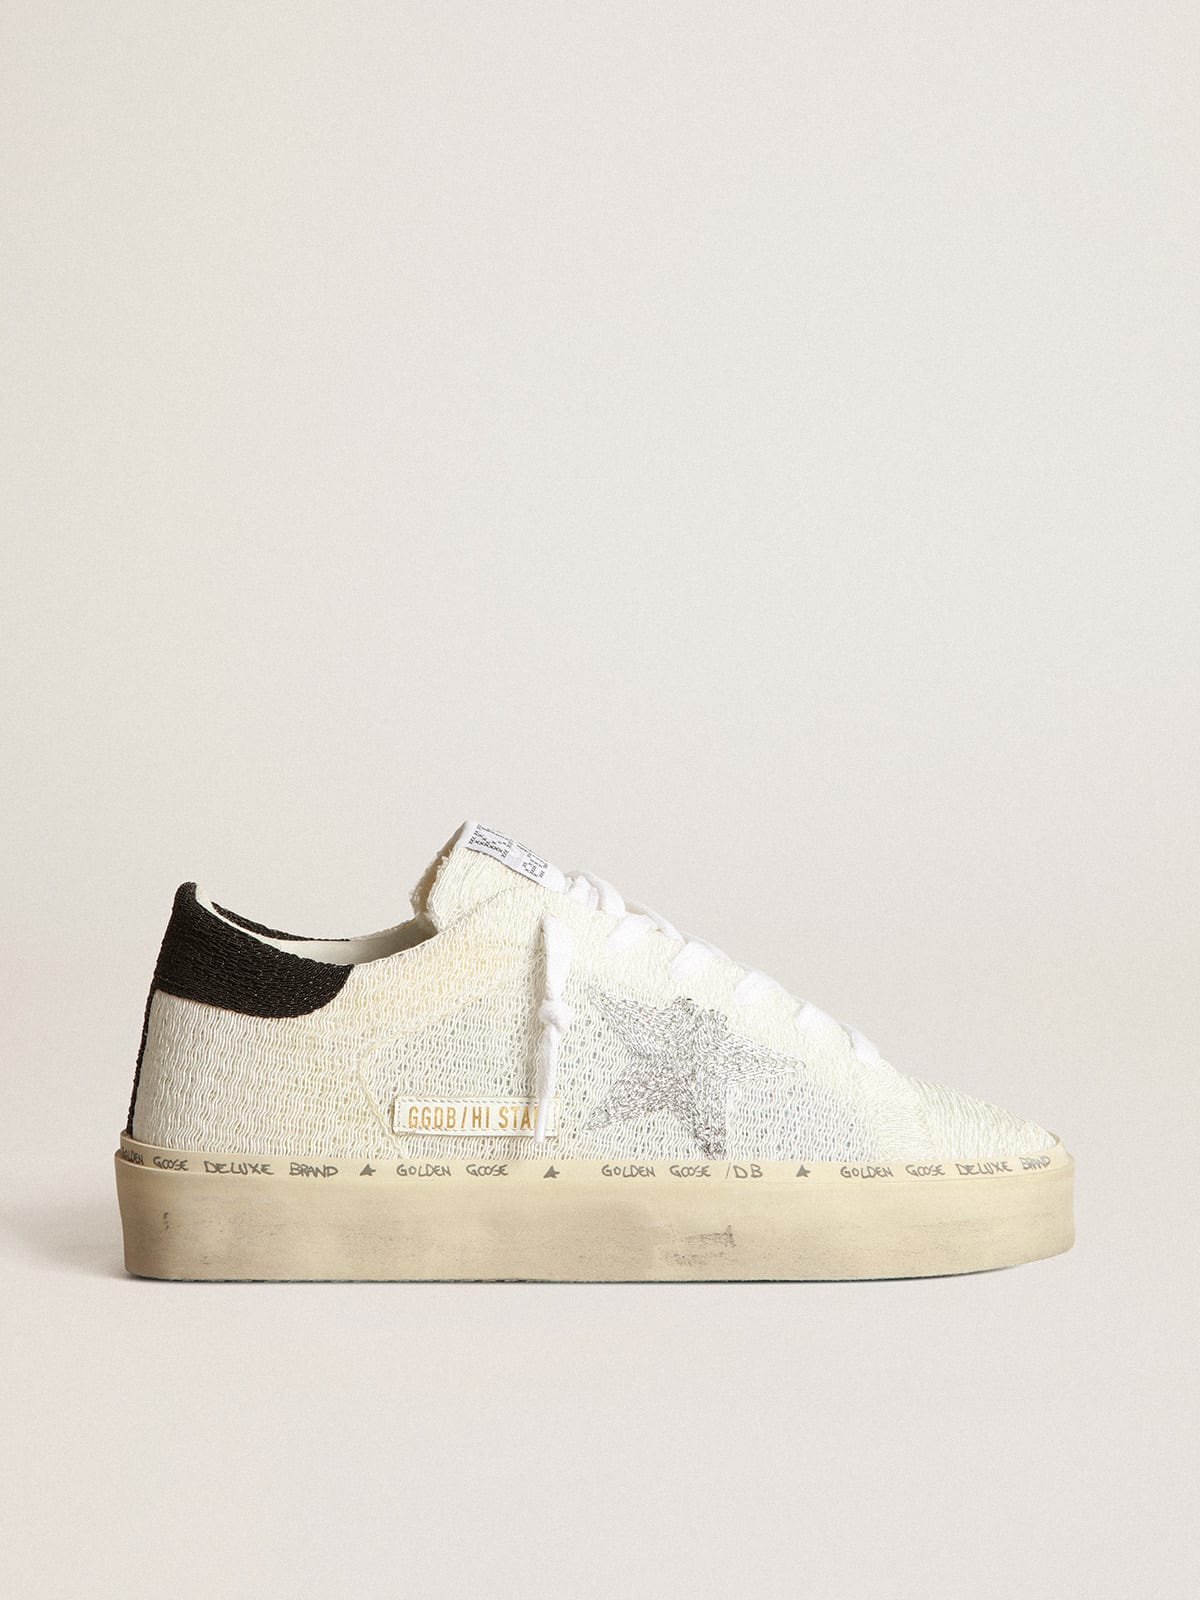 Hi Star sneakers in white knit with silver knit star and black knit heel tab